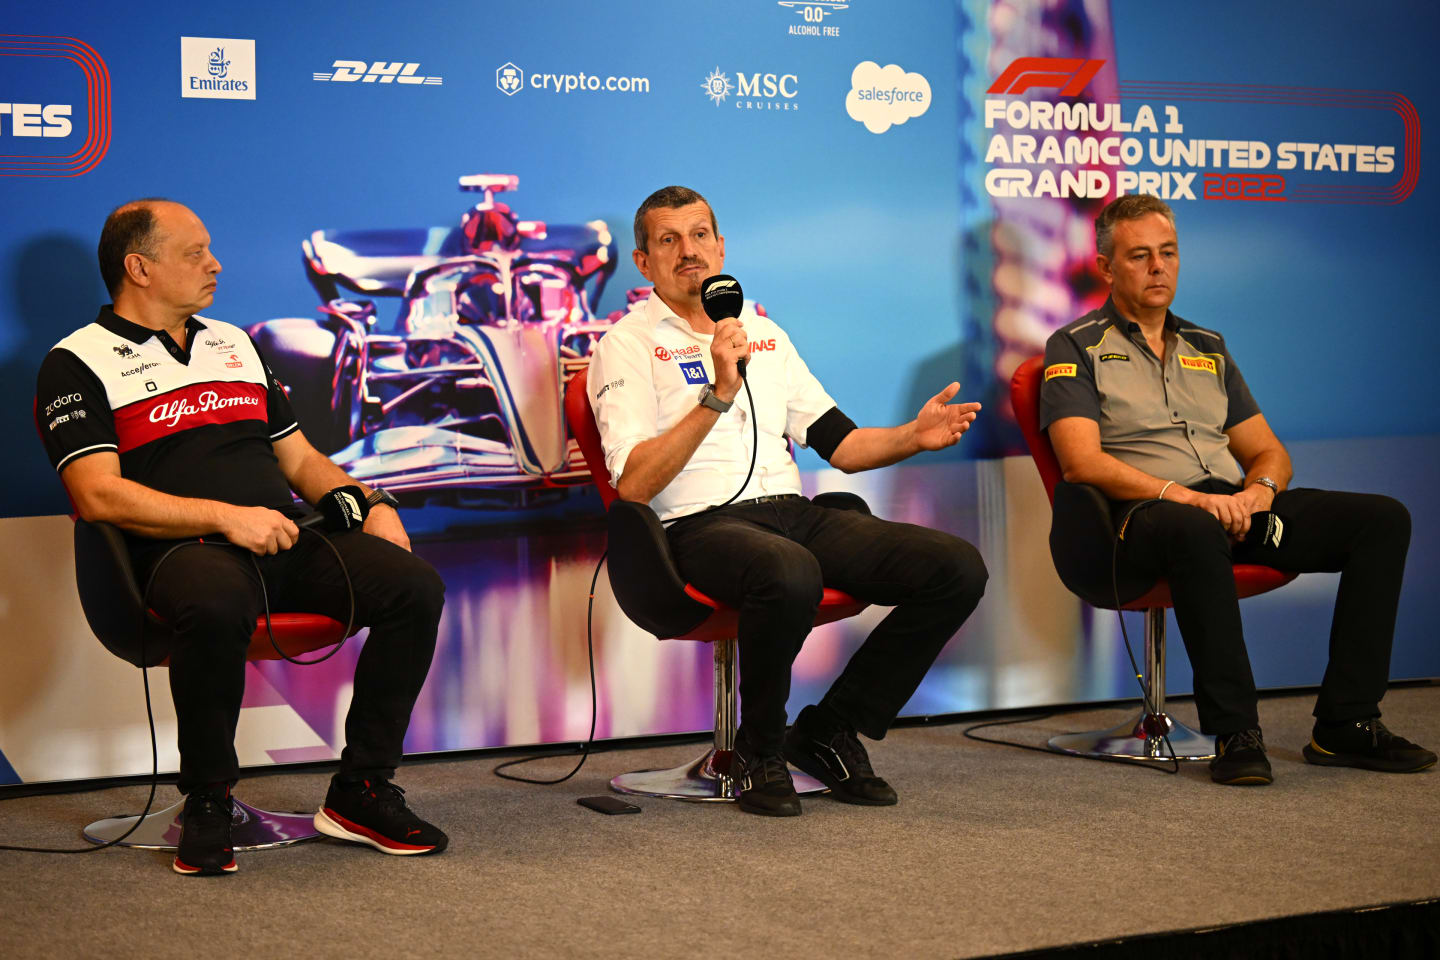 AUSTIN, TEXAS - OCTOBER 22: (L-R) Alfa Romeo Racing Team Principal Frederic Vasseur, Haas F1 Team Principal Guenther Steiner and Director of Pirelli F1 Mario Isola attend the Team Principals Press Conference prior to final practice ahead of the F1 Grand Prix of USA at Circuit of The Americas on October 22, 2022 in Austin, Texas. (Photo by Clive Mason/Getty Images)